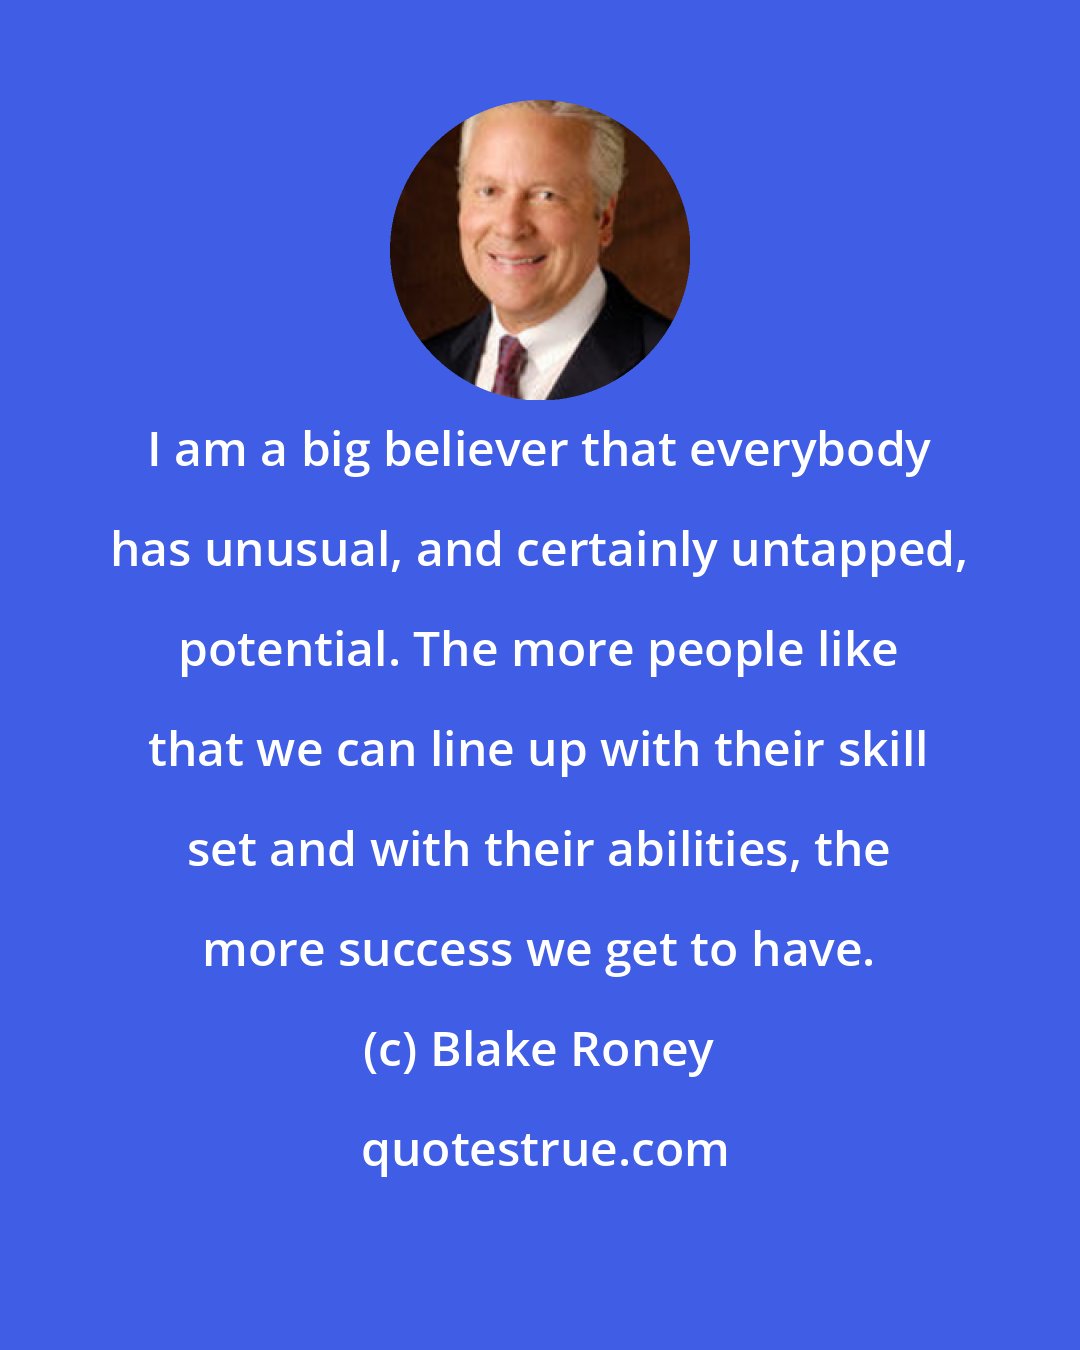 Blake Roney: I am a big believer that everybody has unusual, and certainly untapped, potential. The more people like that we can line up with their skill set and with their abilities, the more success we get to have.